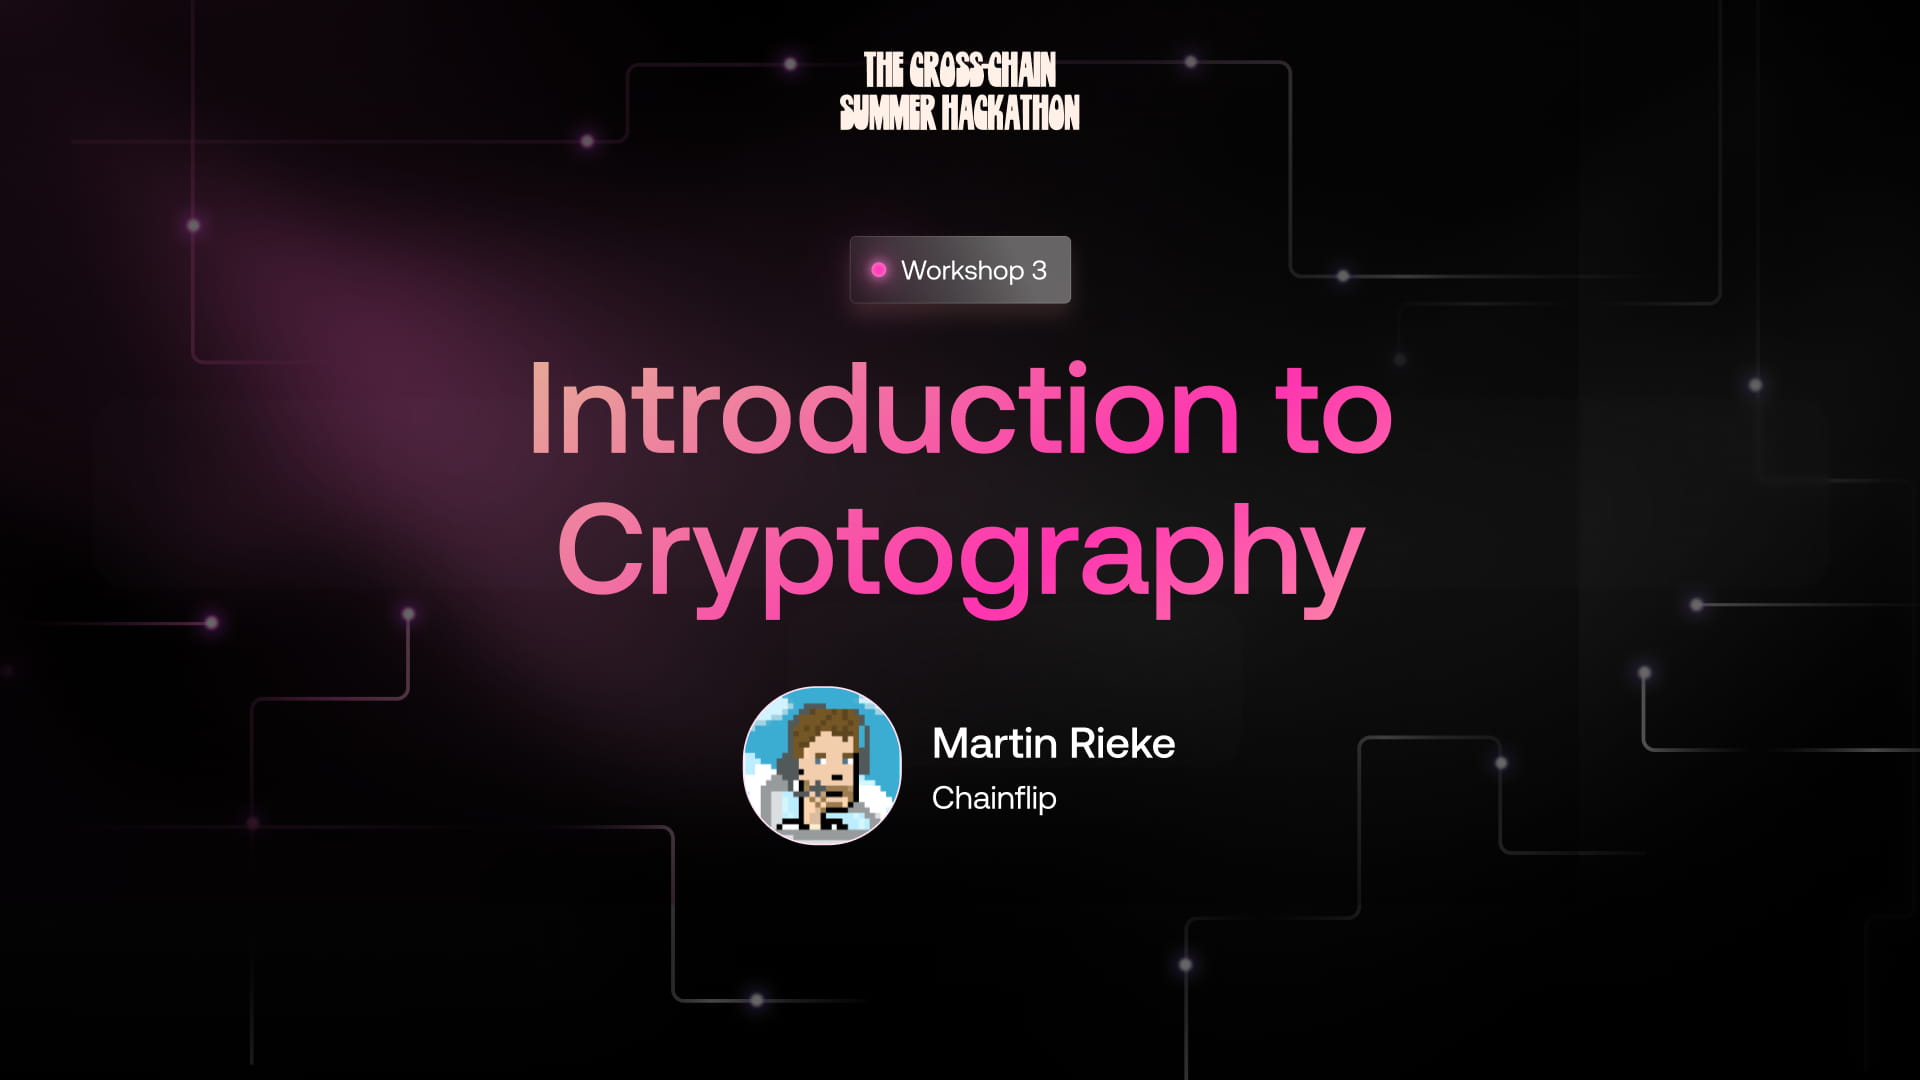 Introduction to Cryptography | Cross-Chain Summer Hackathon Workshop 03